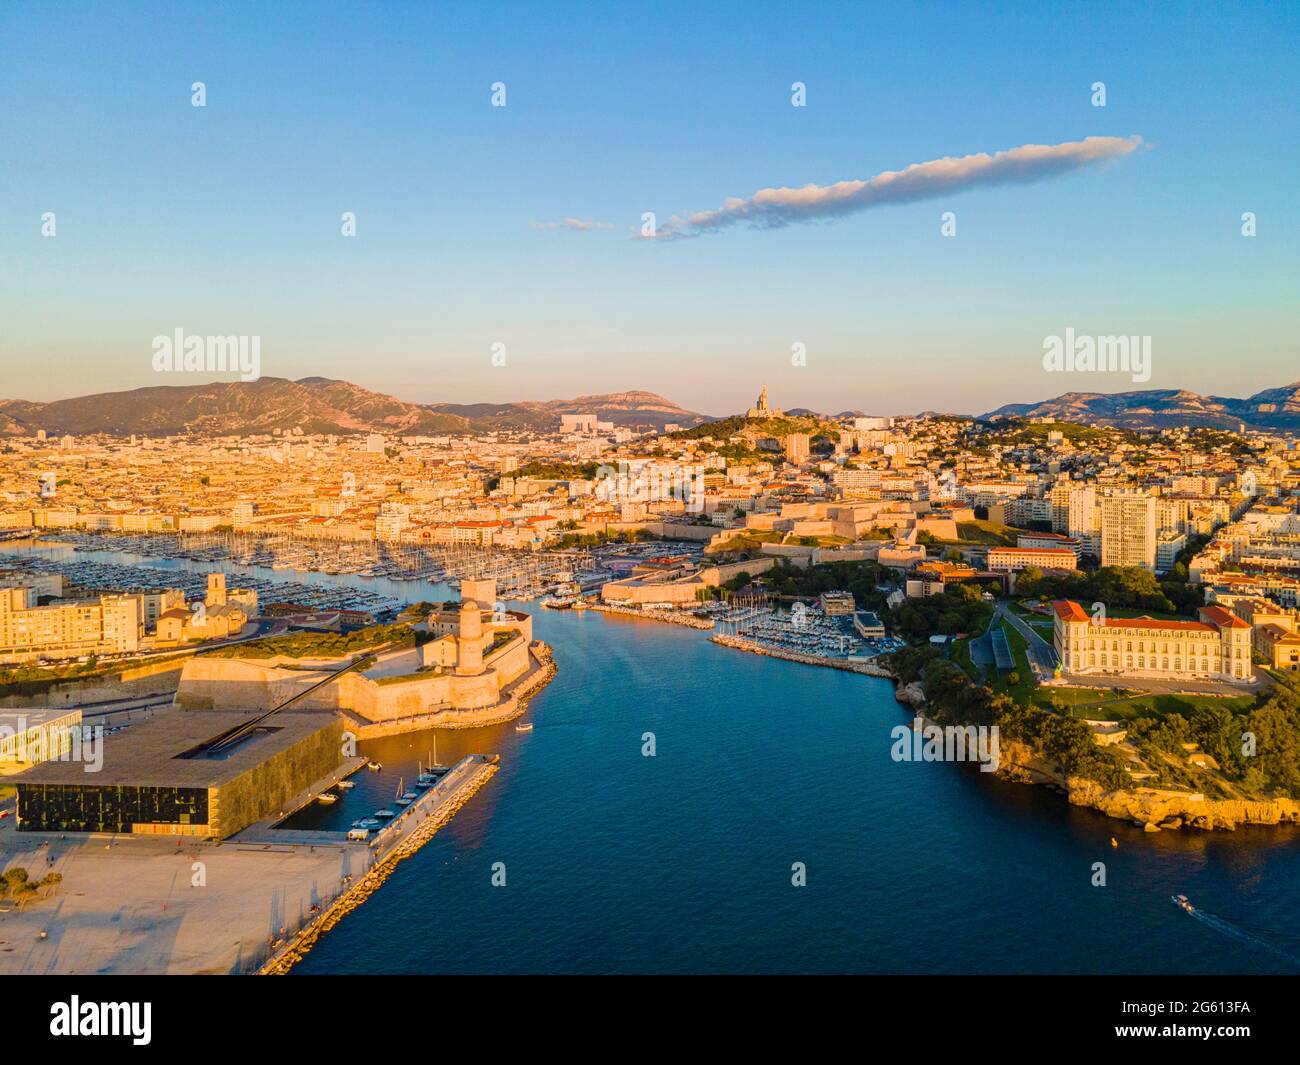 France, Bouches du Rhone, Marseille, general view of the Old Port, with the Fort Saint Jean, the Mucem, the Pharo Palace and the Notre Dame de la Garde basilica (aerial view) Stock Photo